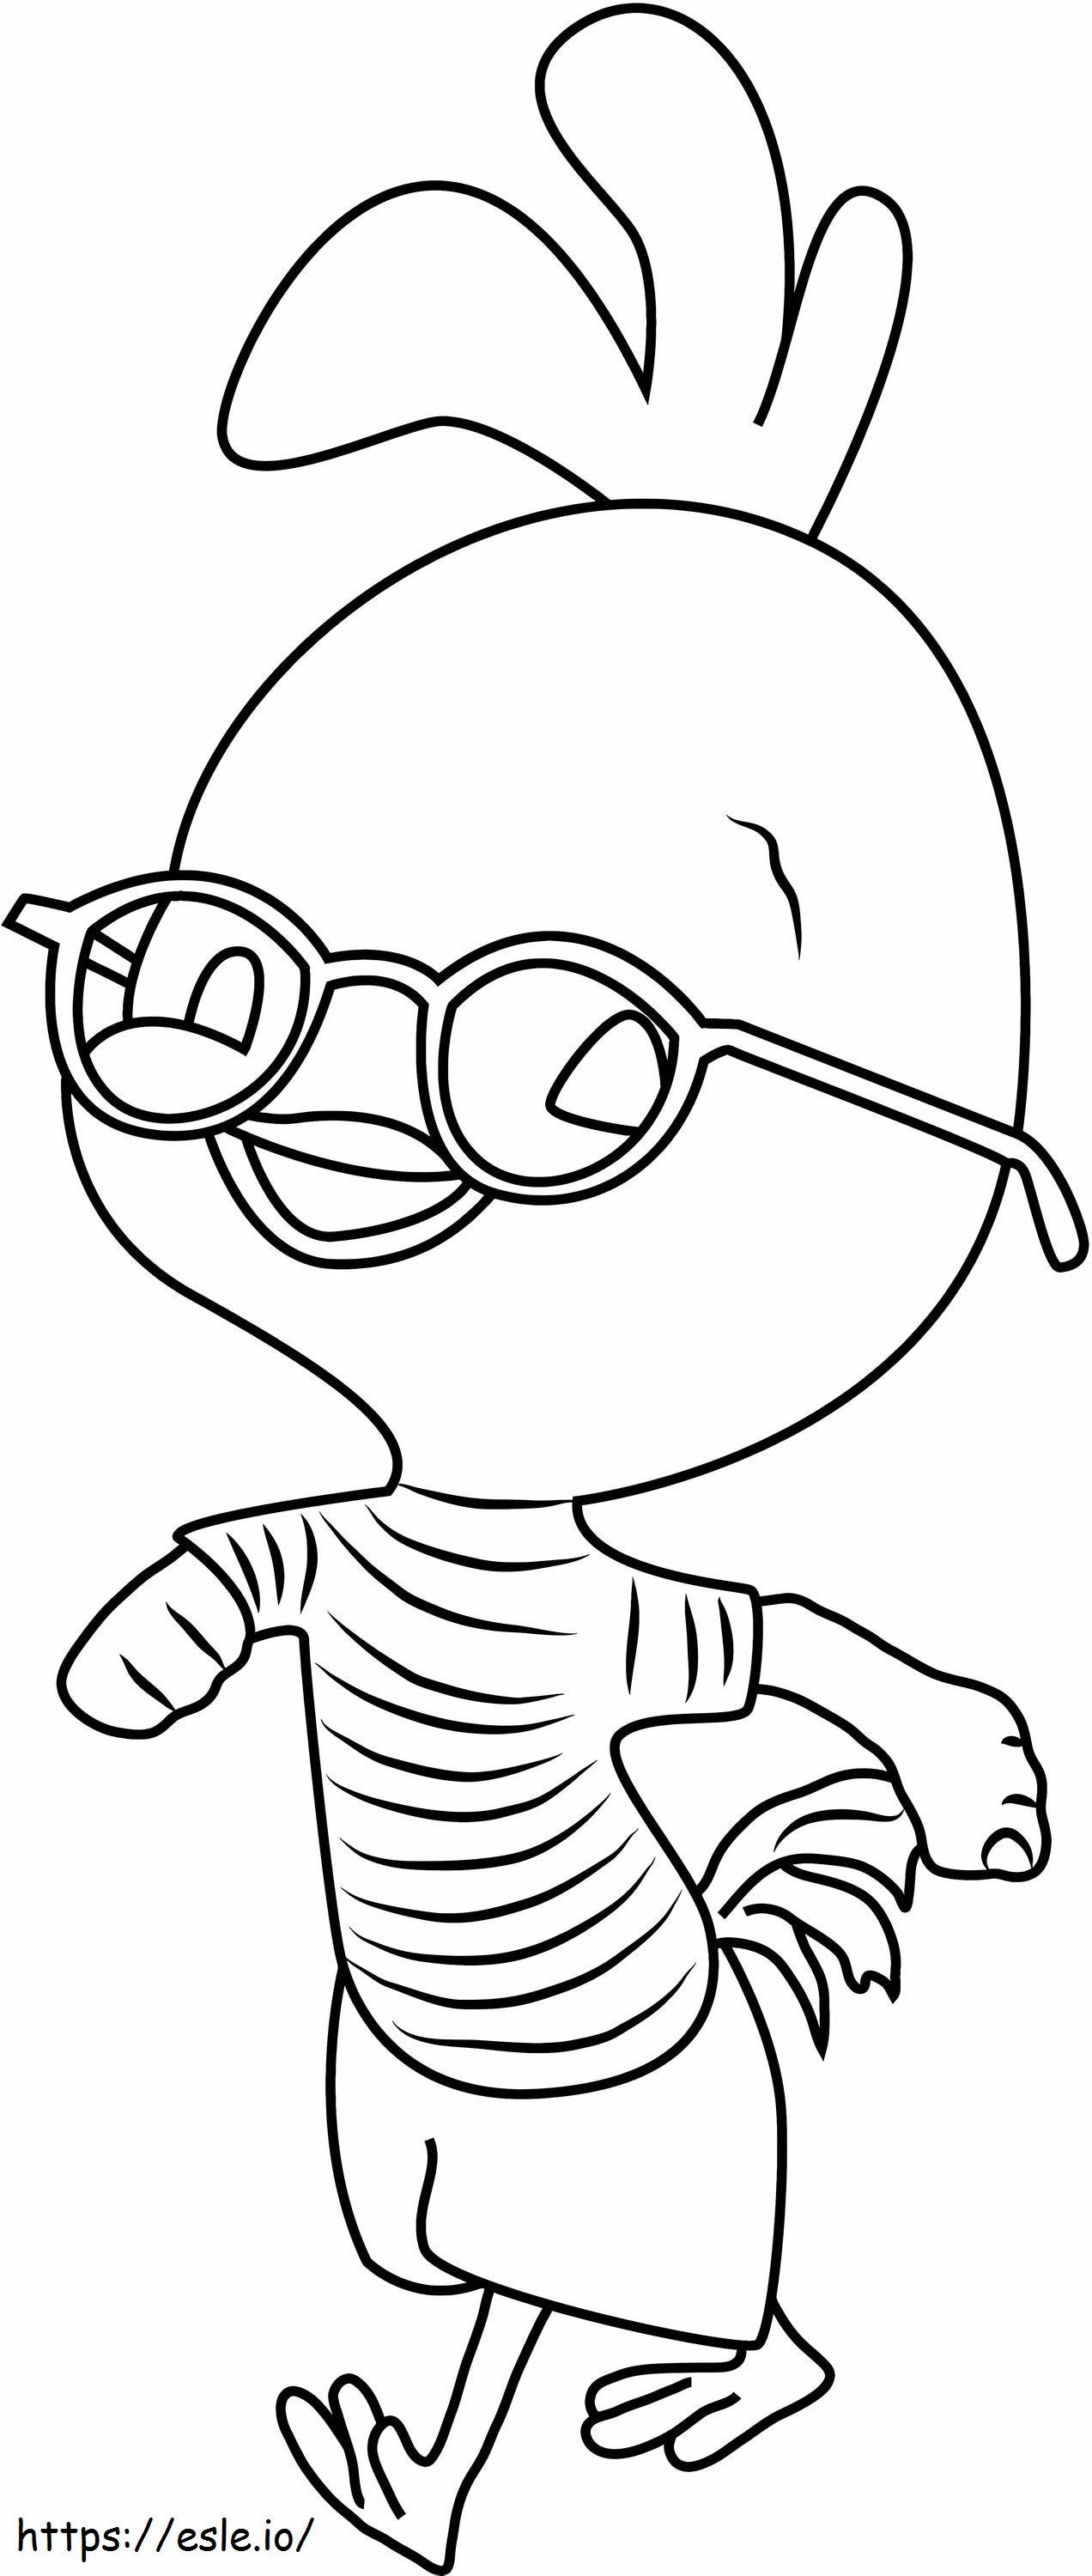 1530928195 Chicken Little Walking A4 coloring page